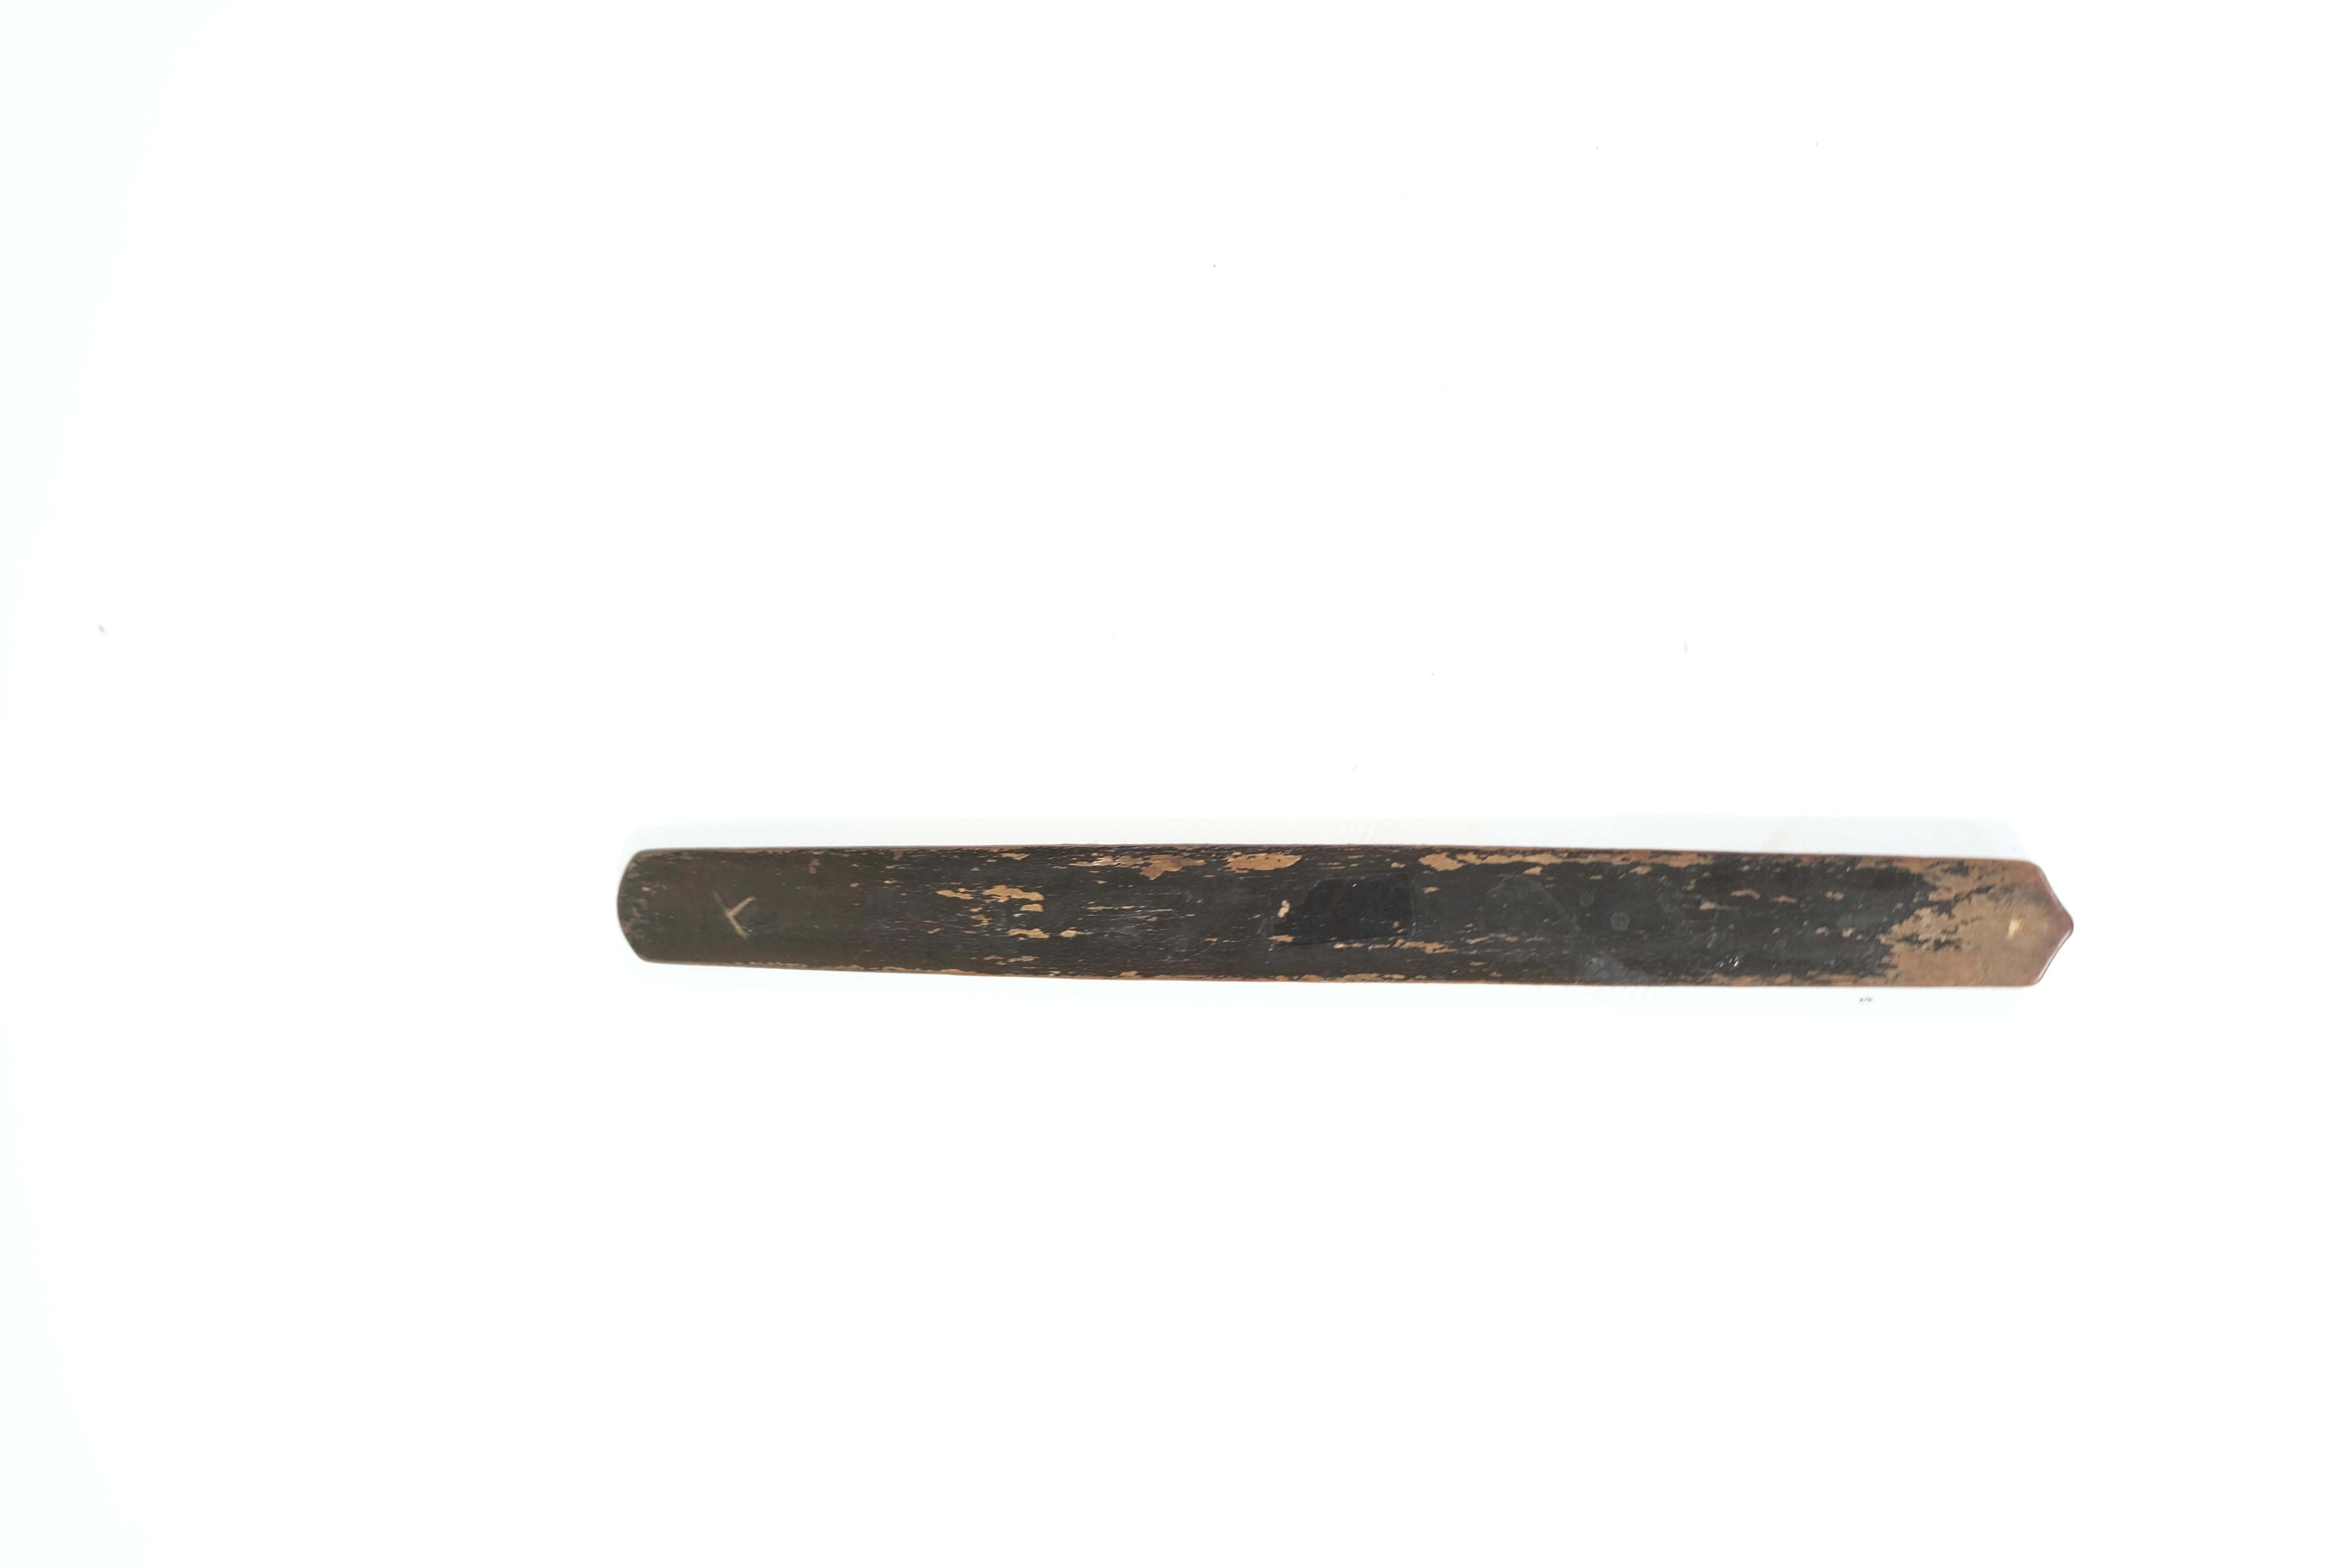 19th Century Ikupasuy, Wooden Carved Ceremonial Stick Used by Ainu Men When Making Offeri